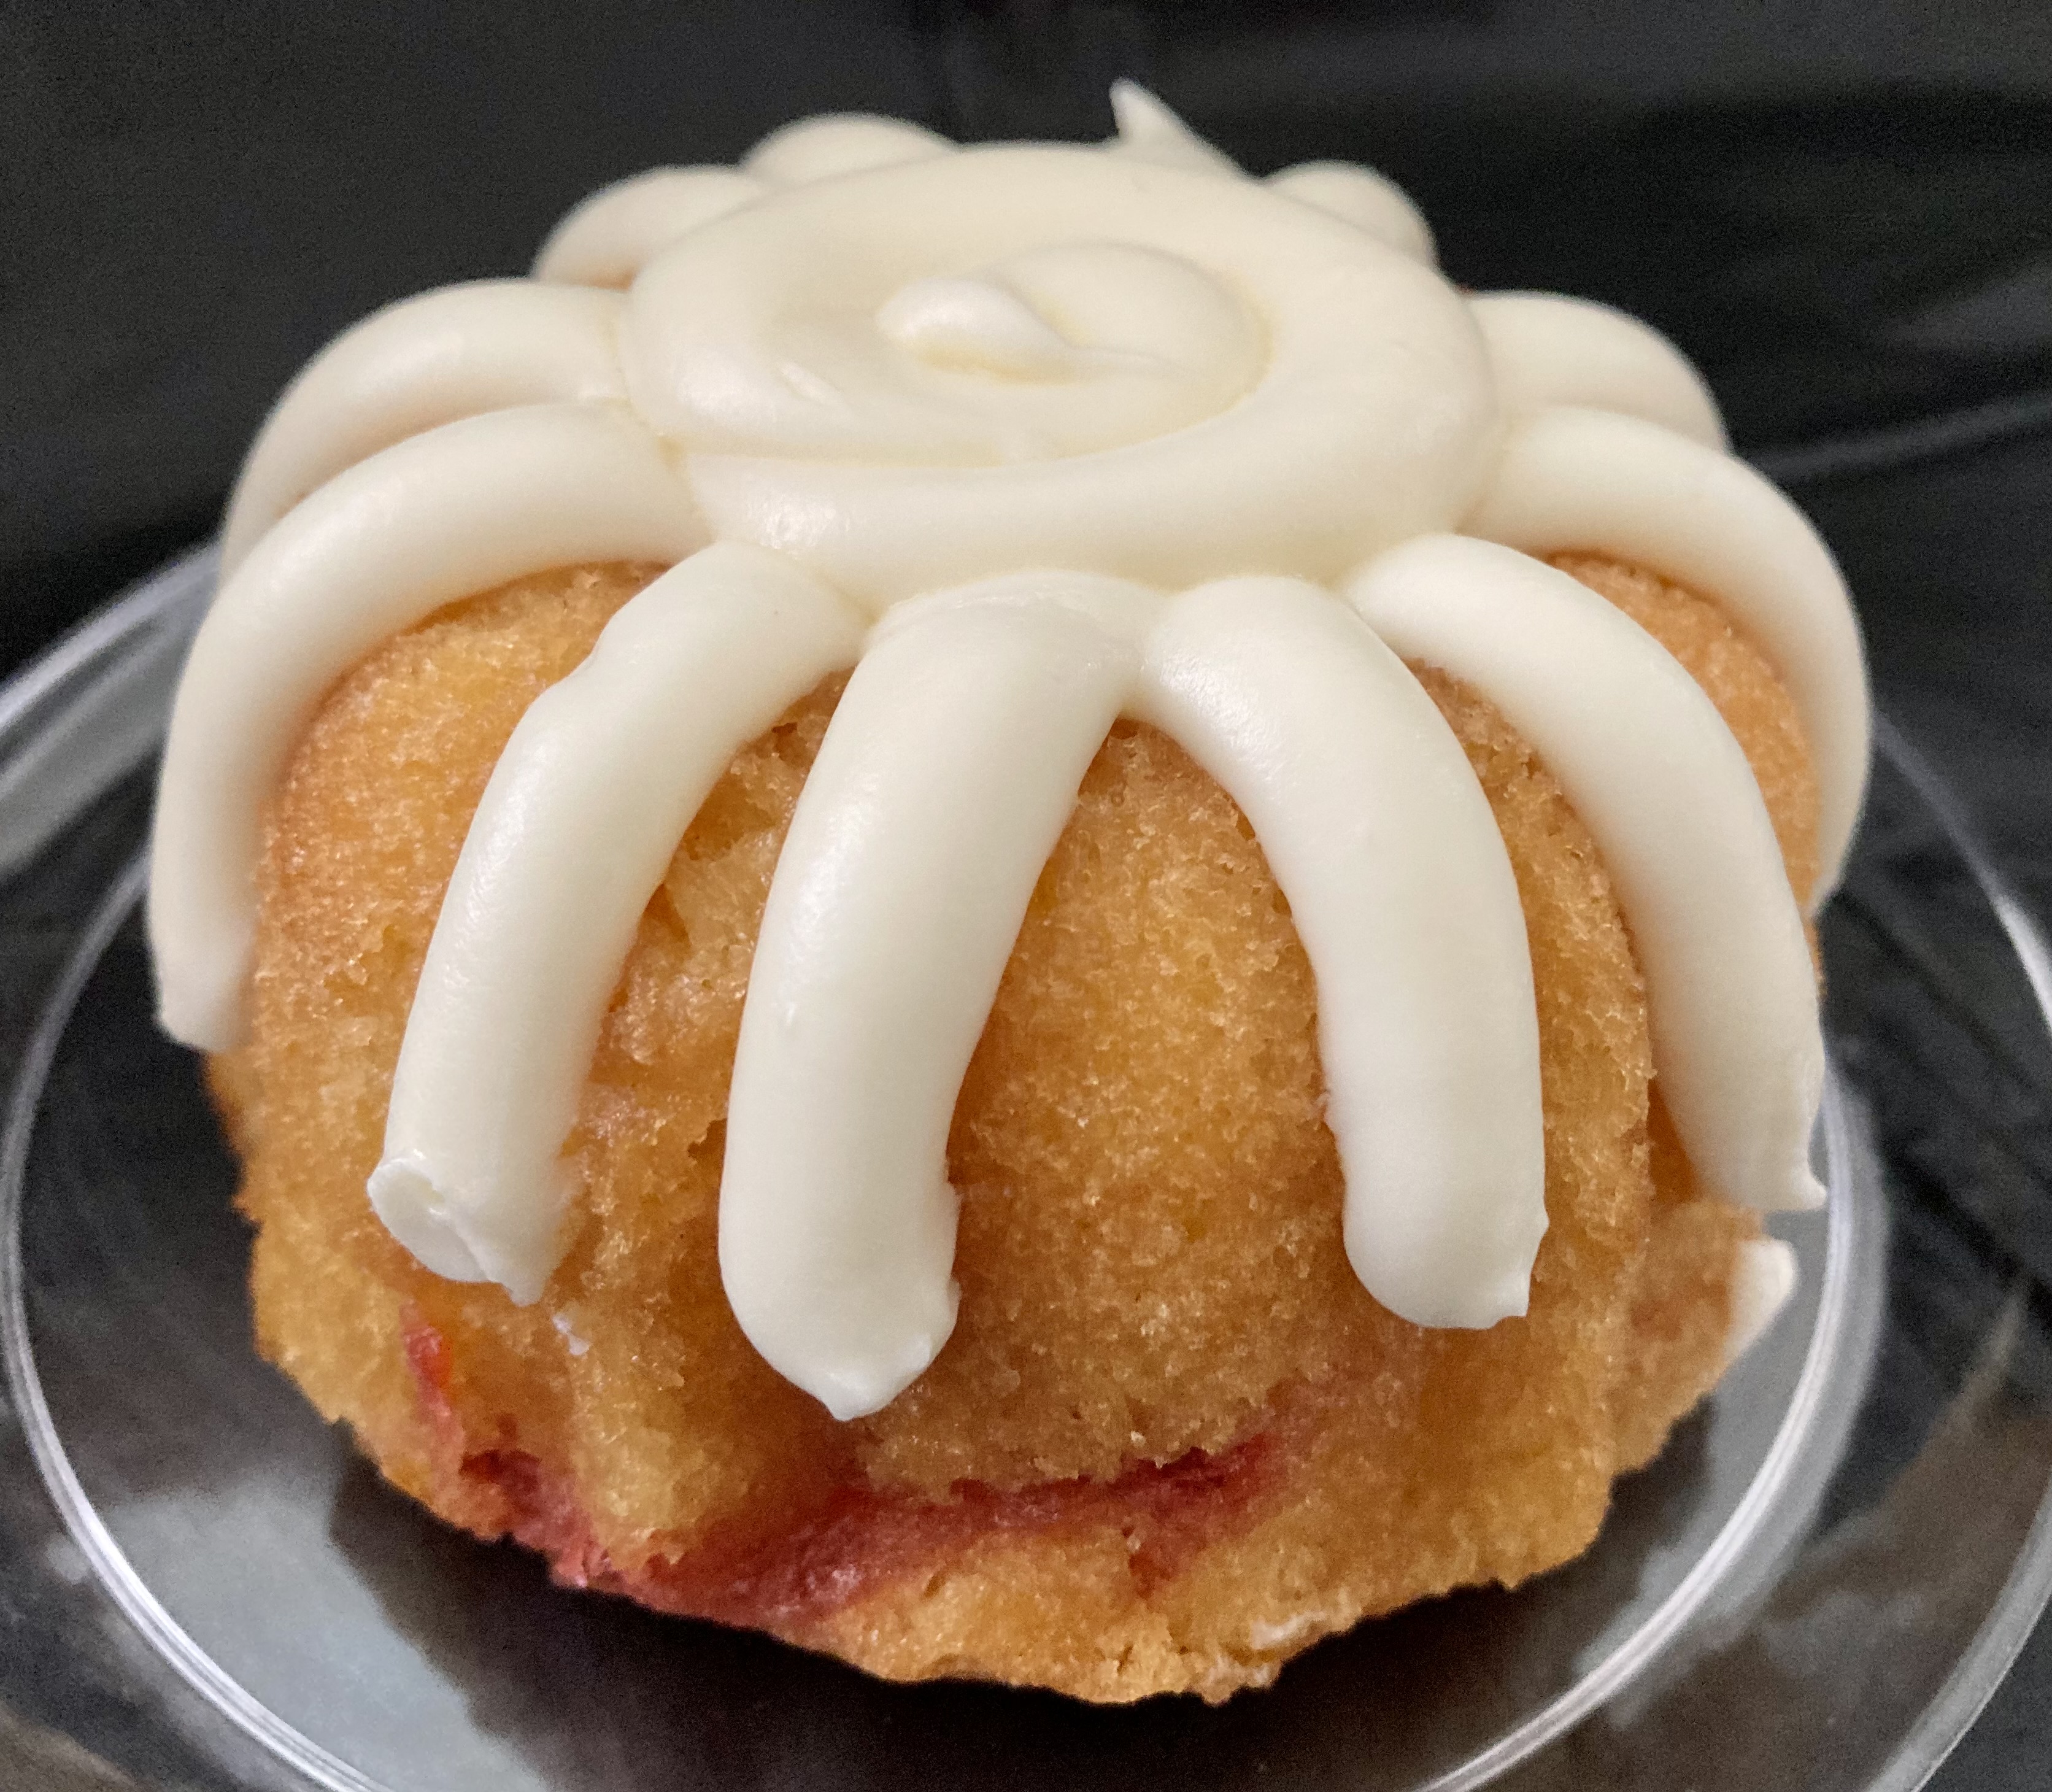 South Your Mouth: White Chocolate Berry Bundt Cake